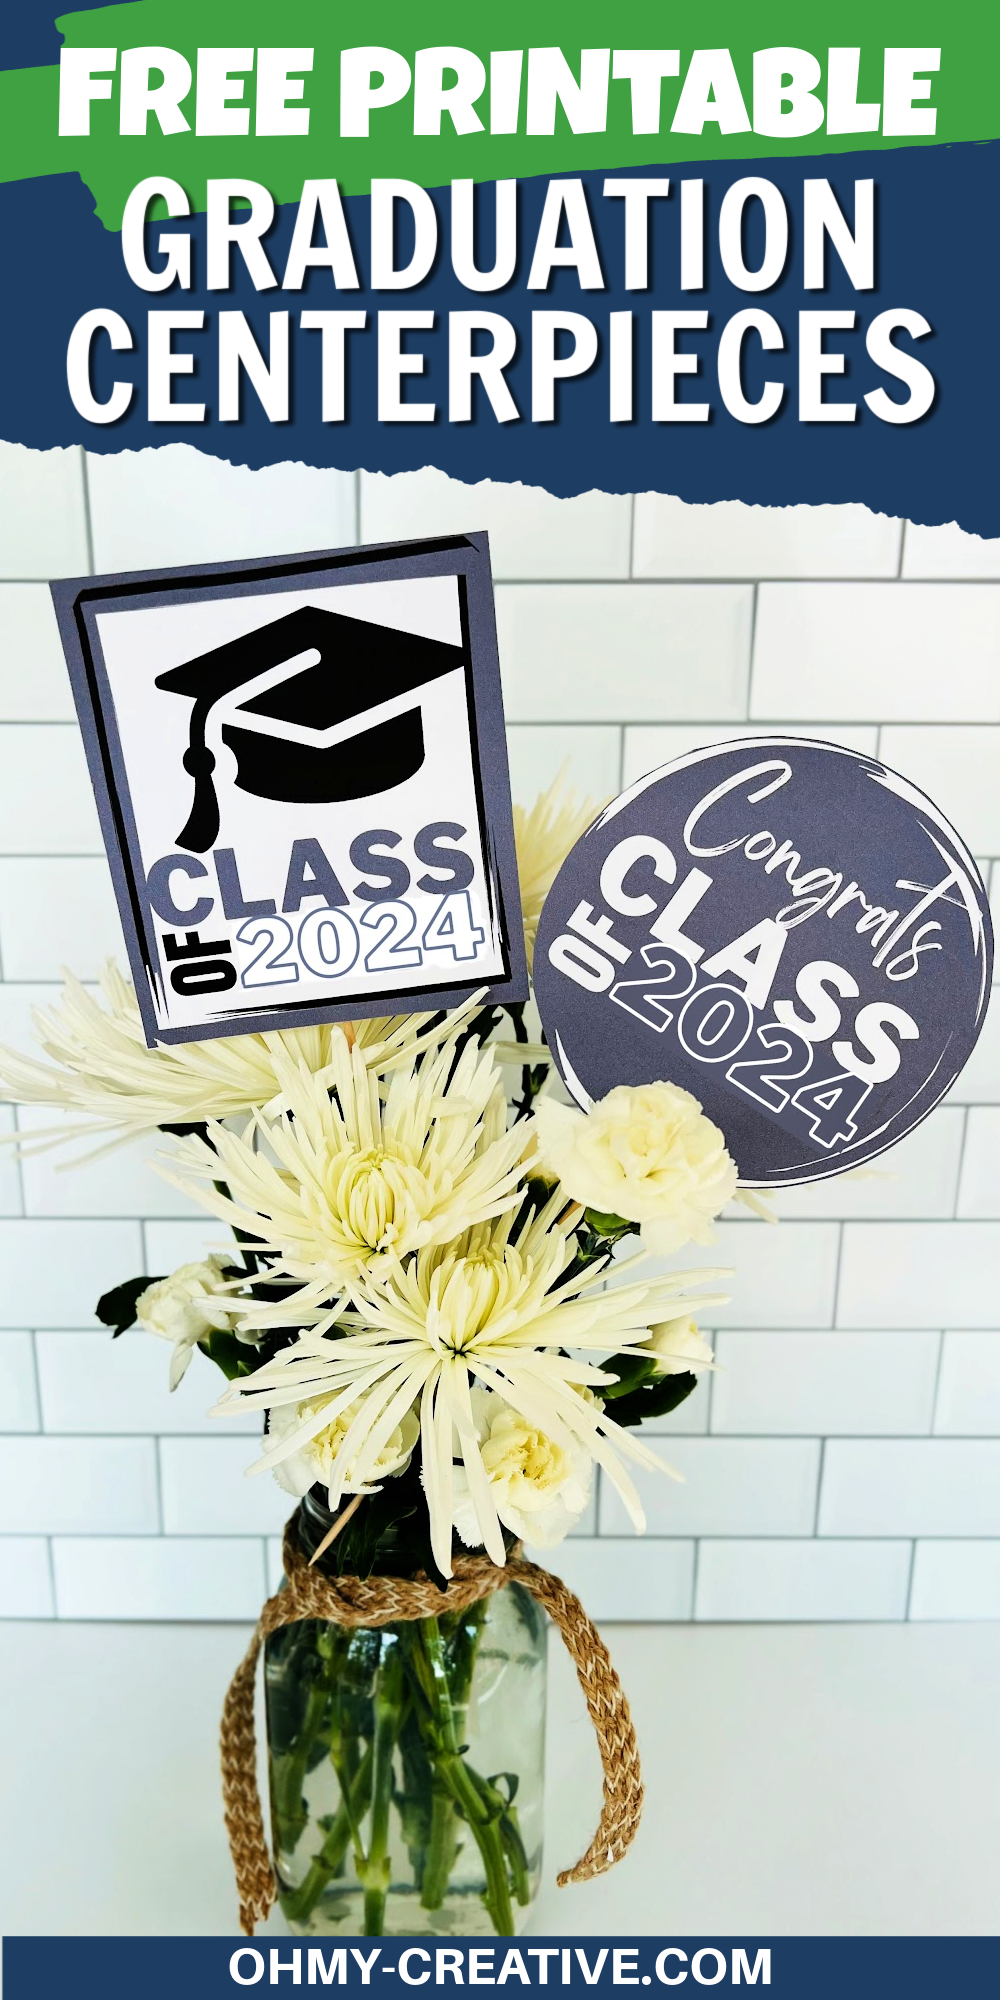 pin image of a graduation party centerpiece with a printable "class of 2024" on a skewer in a vase of flowers.